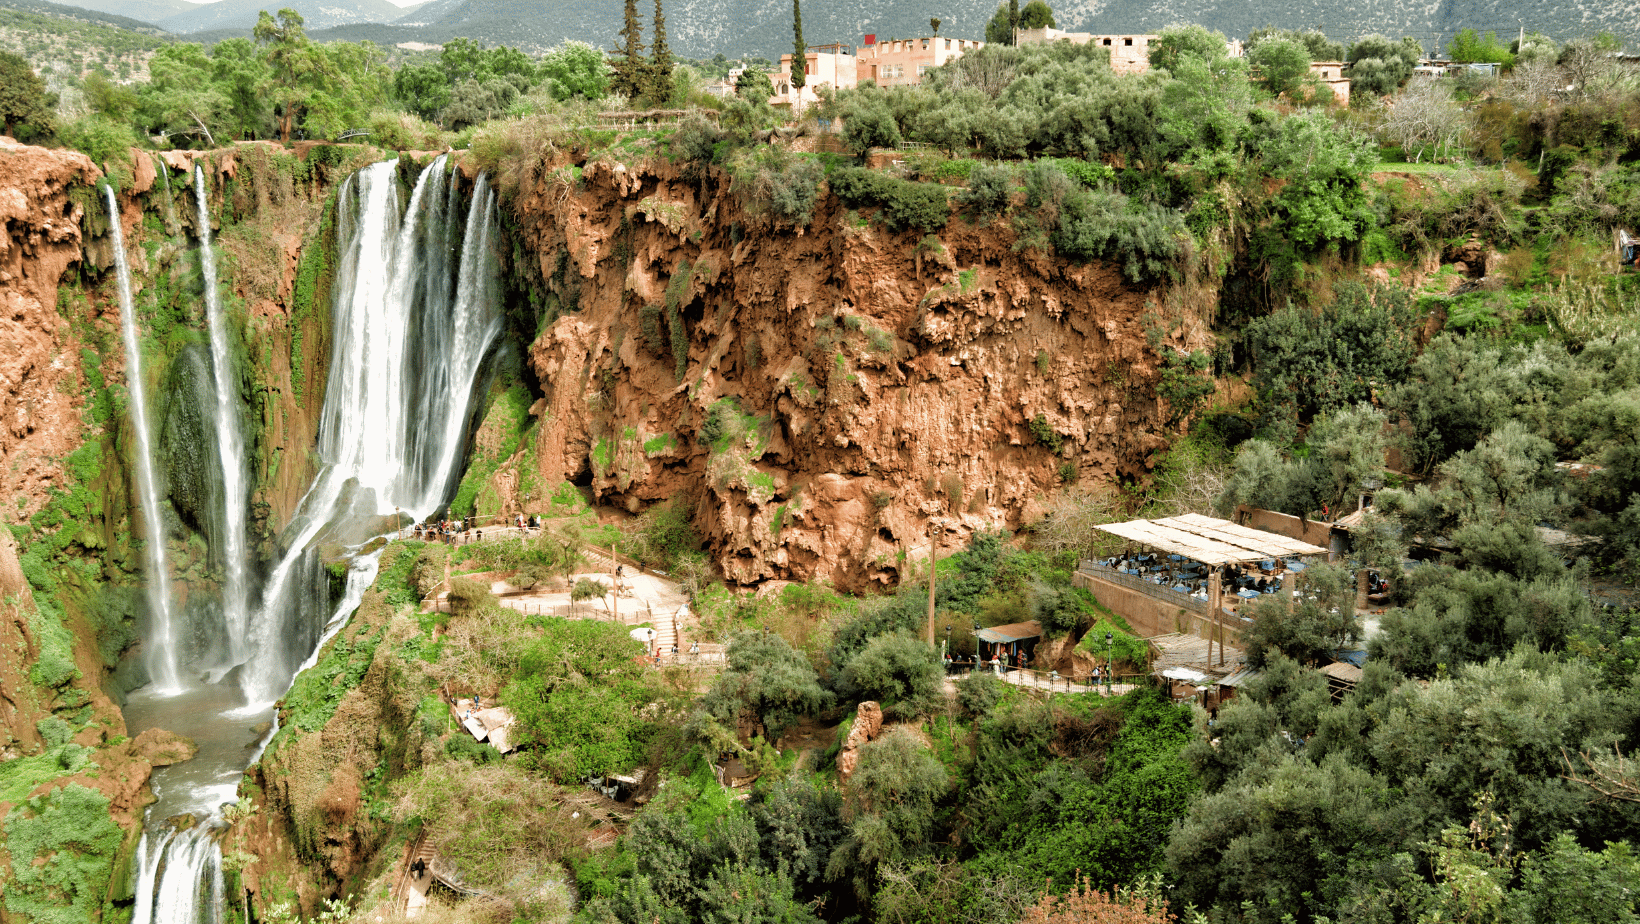 1 DAY TRIP TO OUZOUD WATERFALLS FROM MARRAKECH